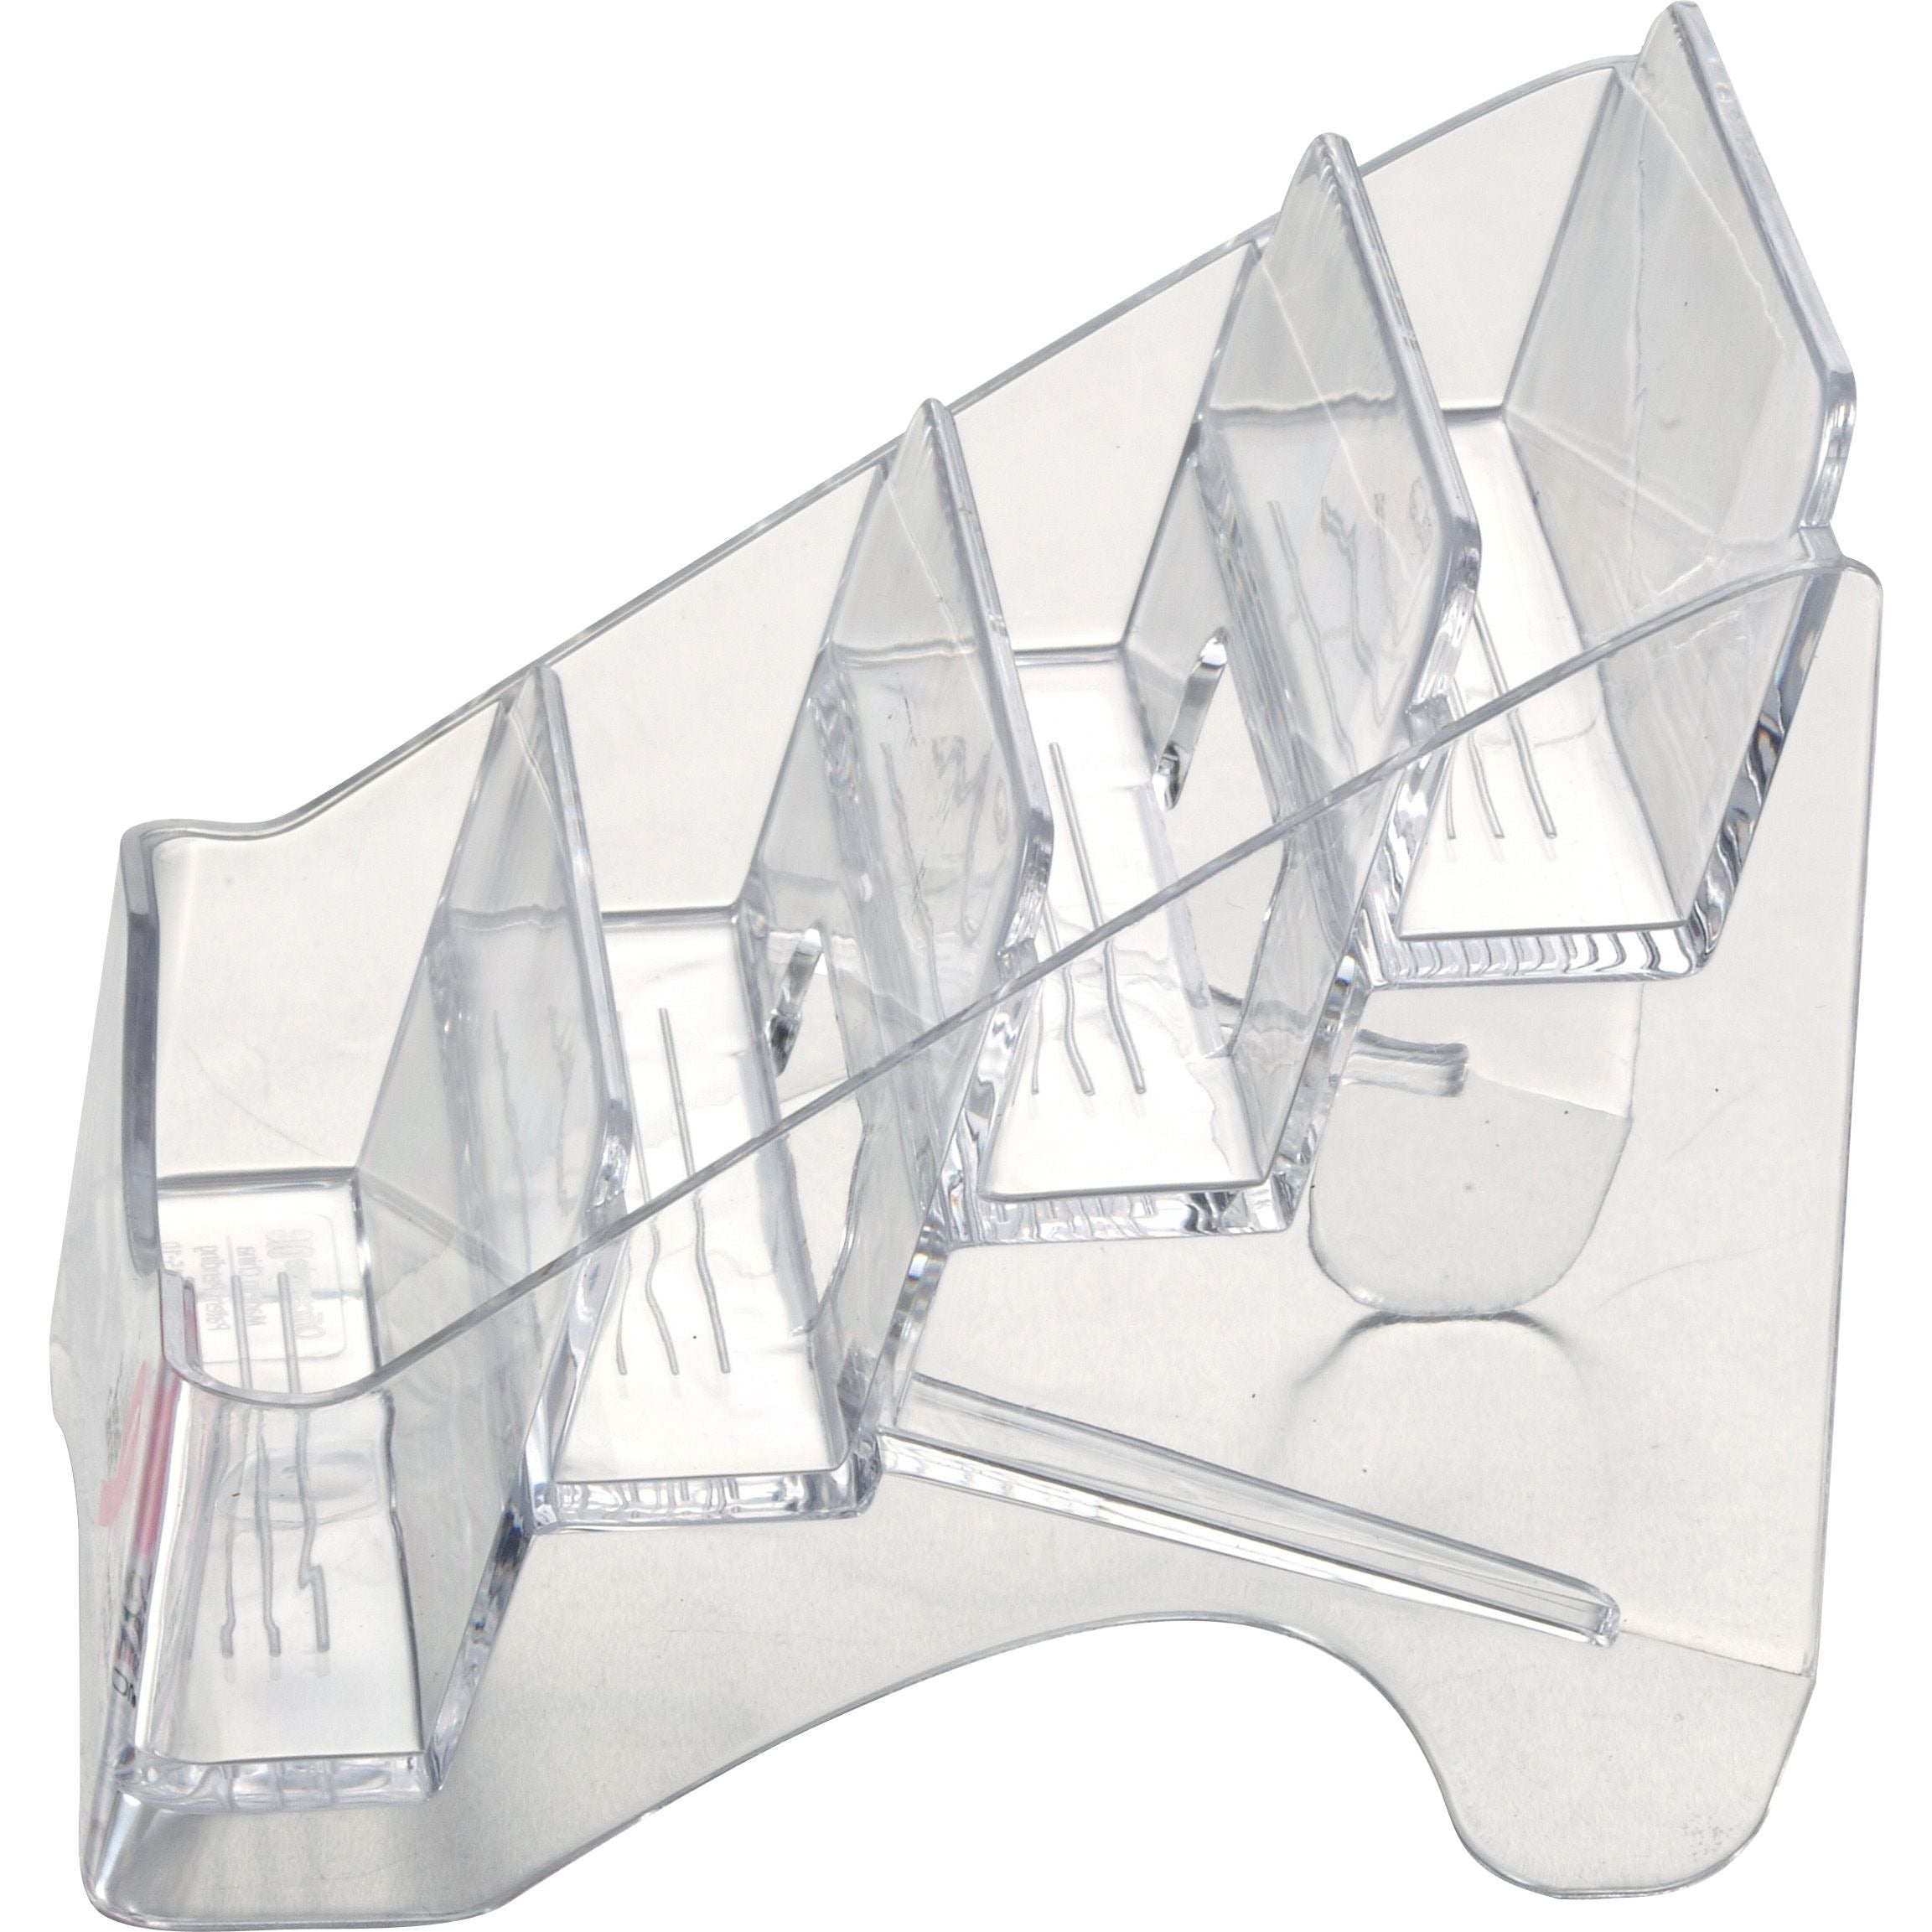 Officemate 4-tier BCA Business Card Holder - 4" x 3.8" x 4" x - Plastic - 1 Each - Clear - 